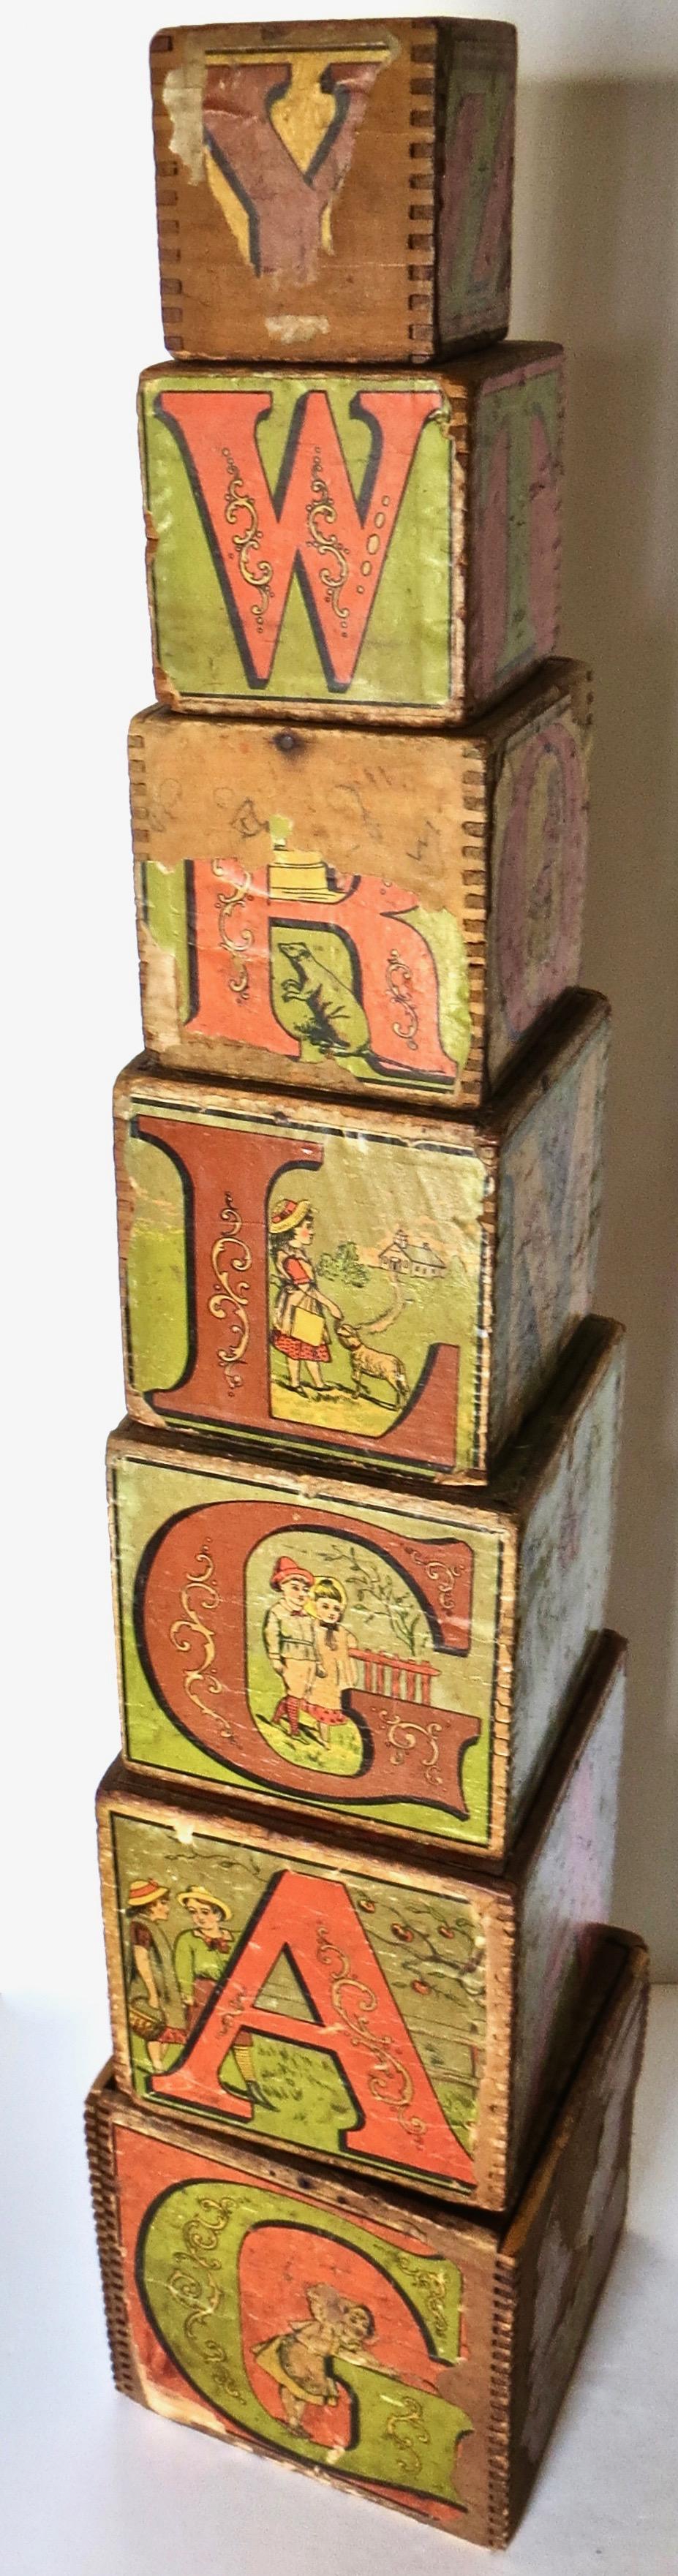 This is a large size set of colorful Victorian blocks which you just don't see anymore and are difficult to find. Considered an early learning device, these 19th century alphabet blocks were made of lithographed paper on wood, with scenes of